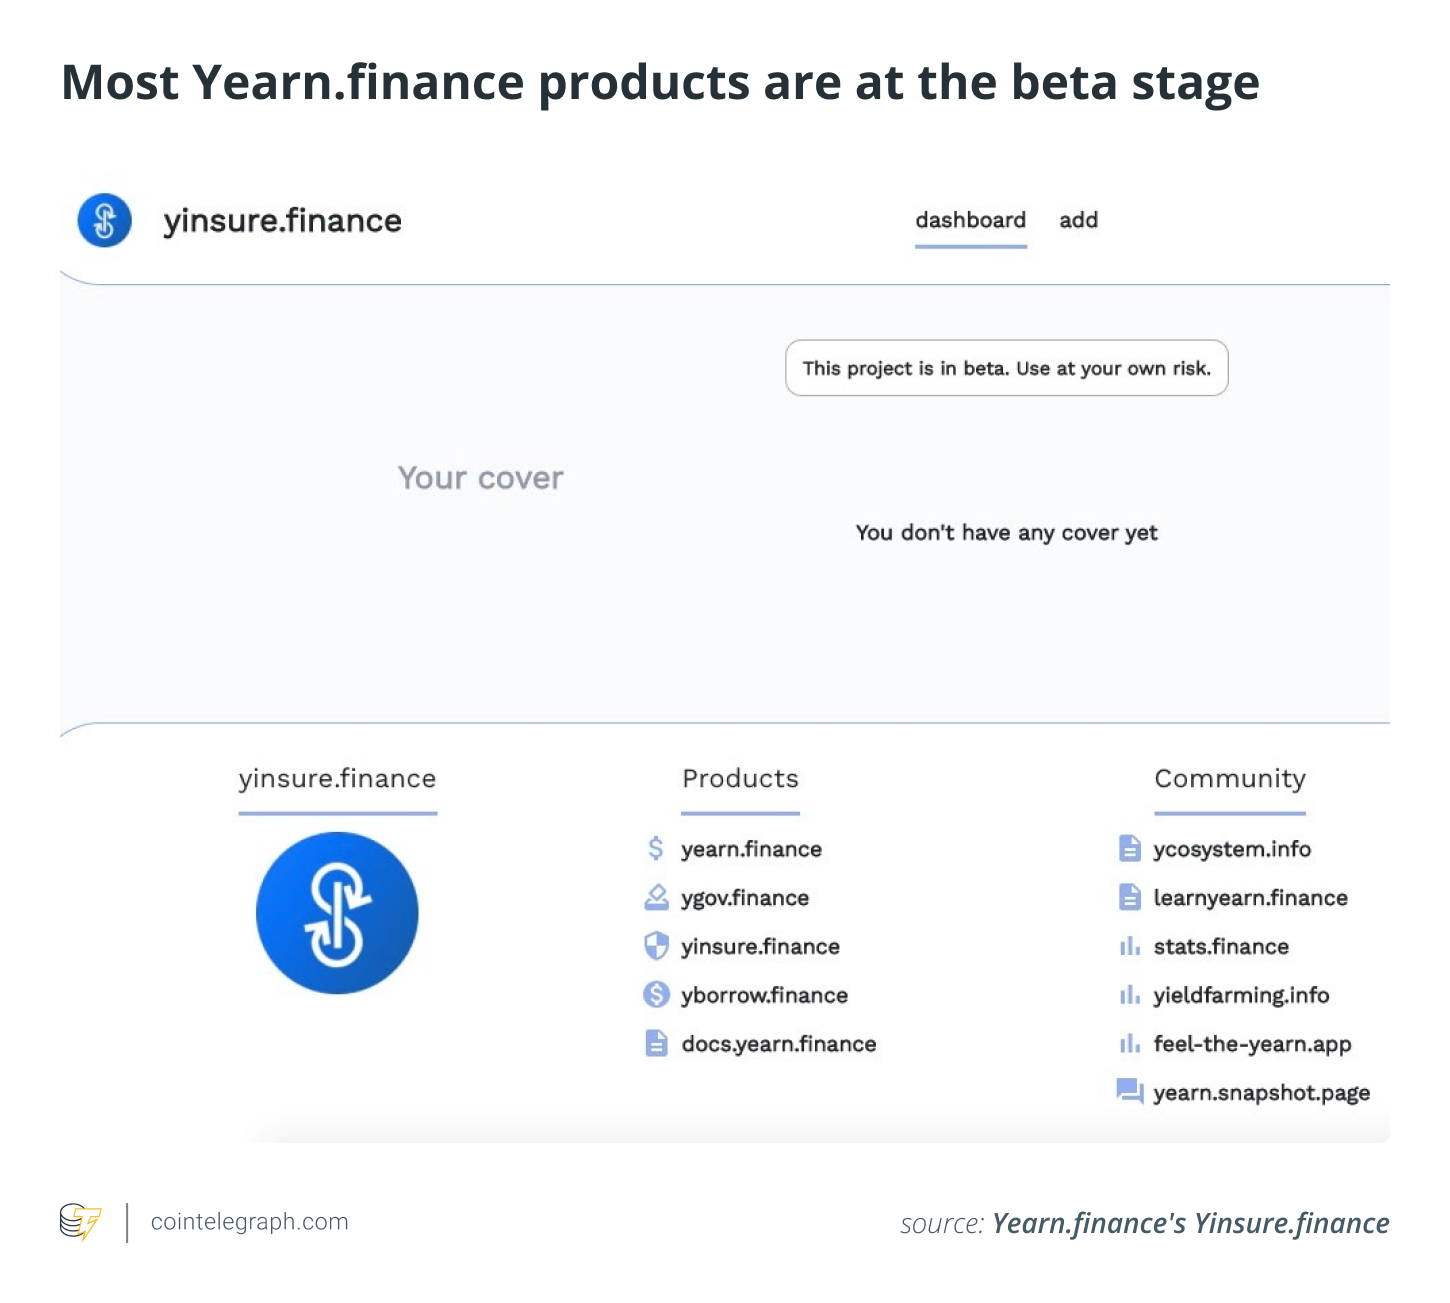 Most Yearn.finance products are in the beta stage